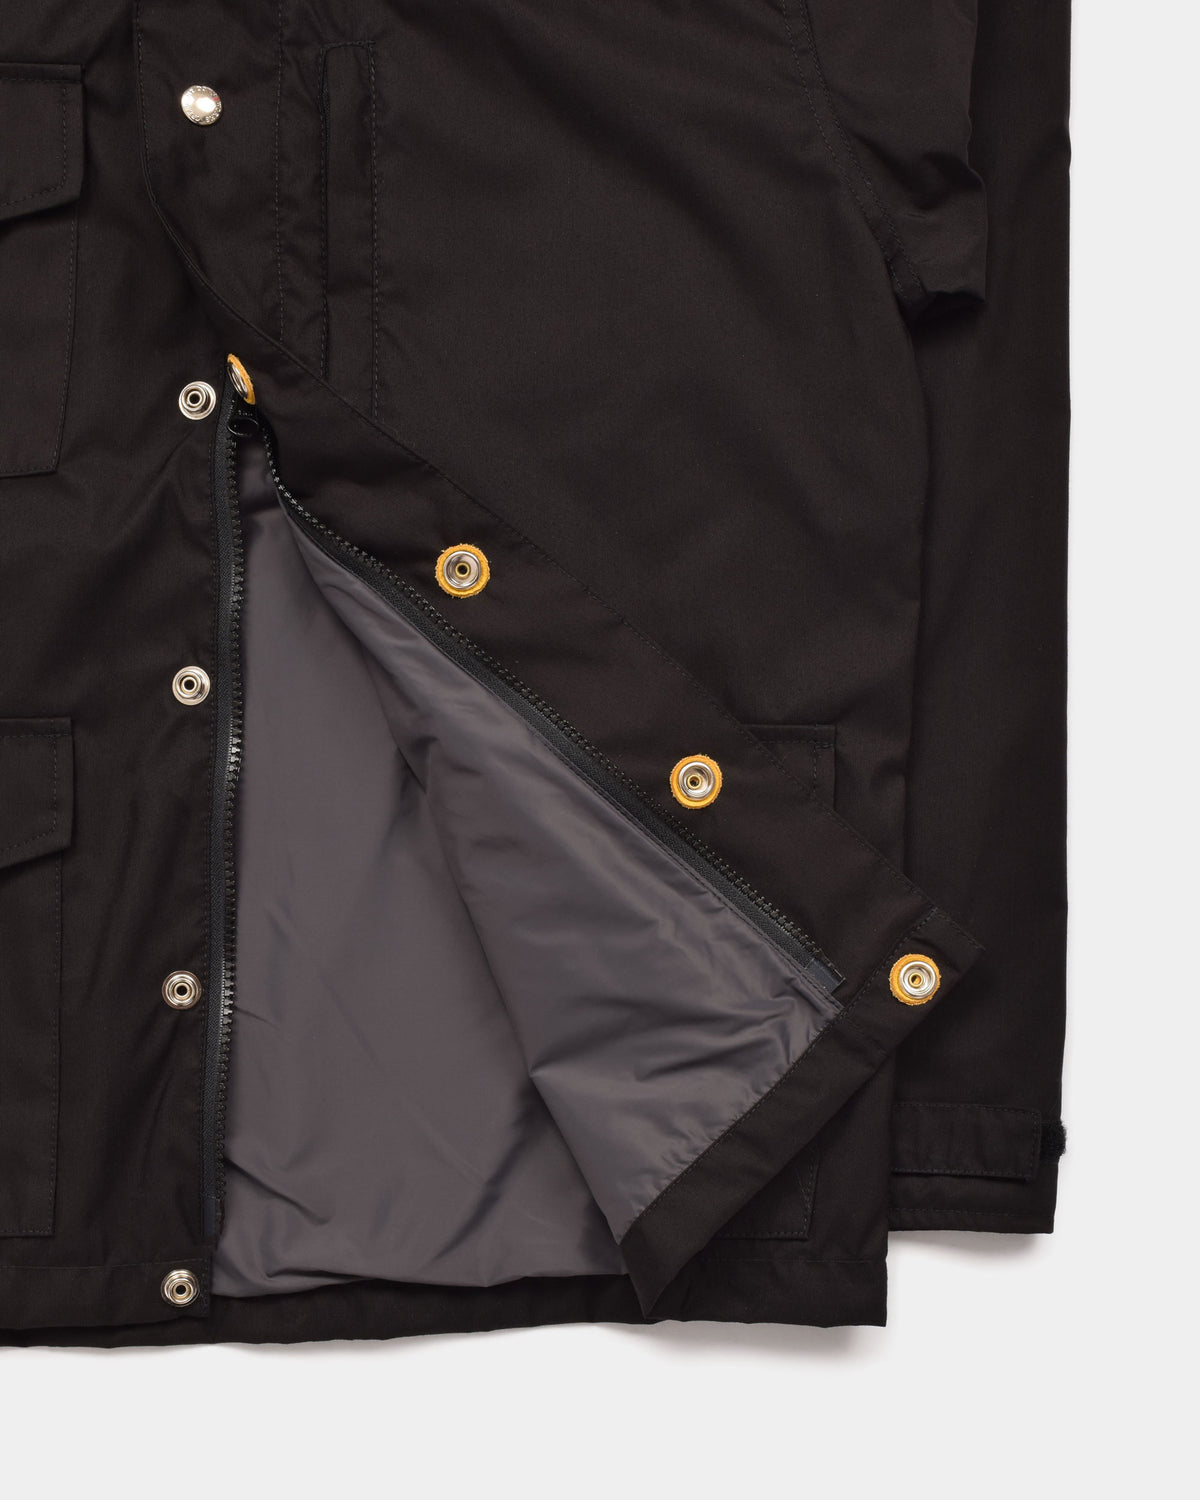 Michi Jacket in Black with detail of hem and lining